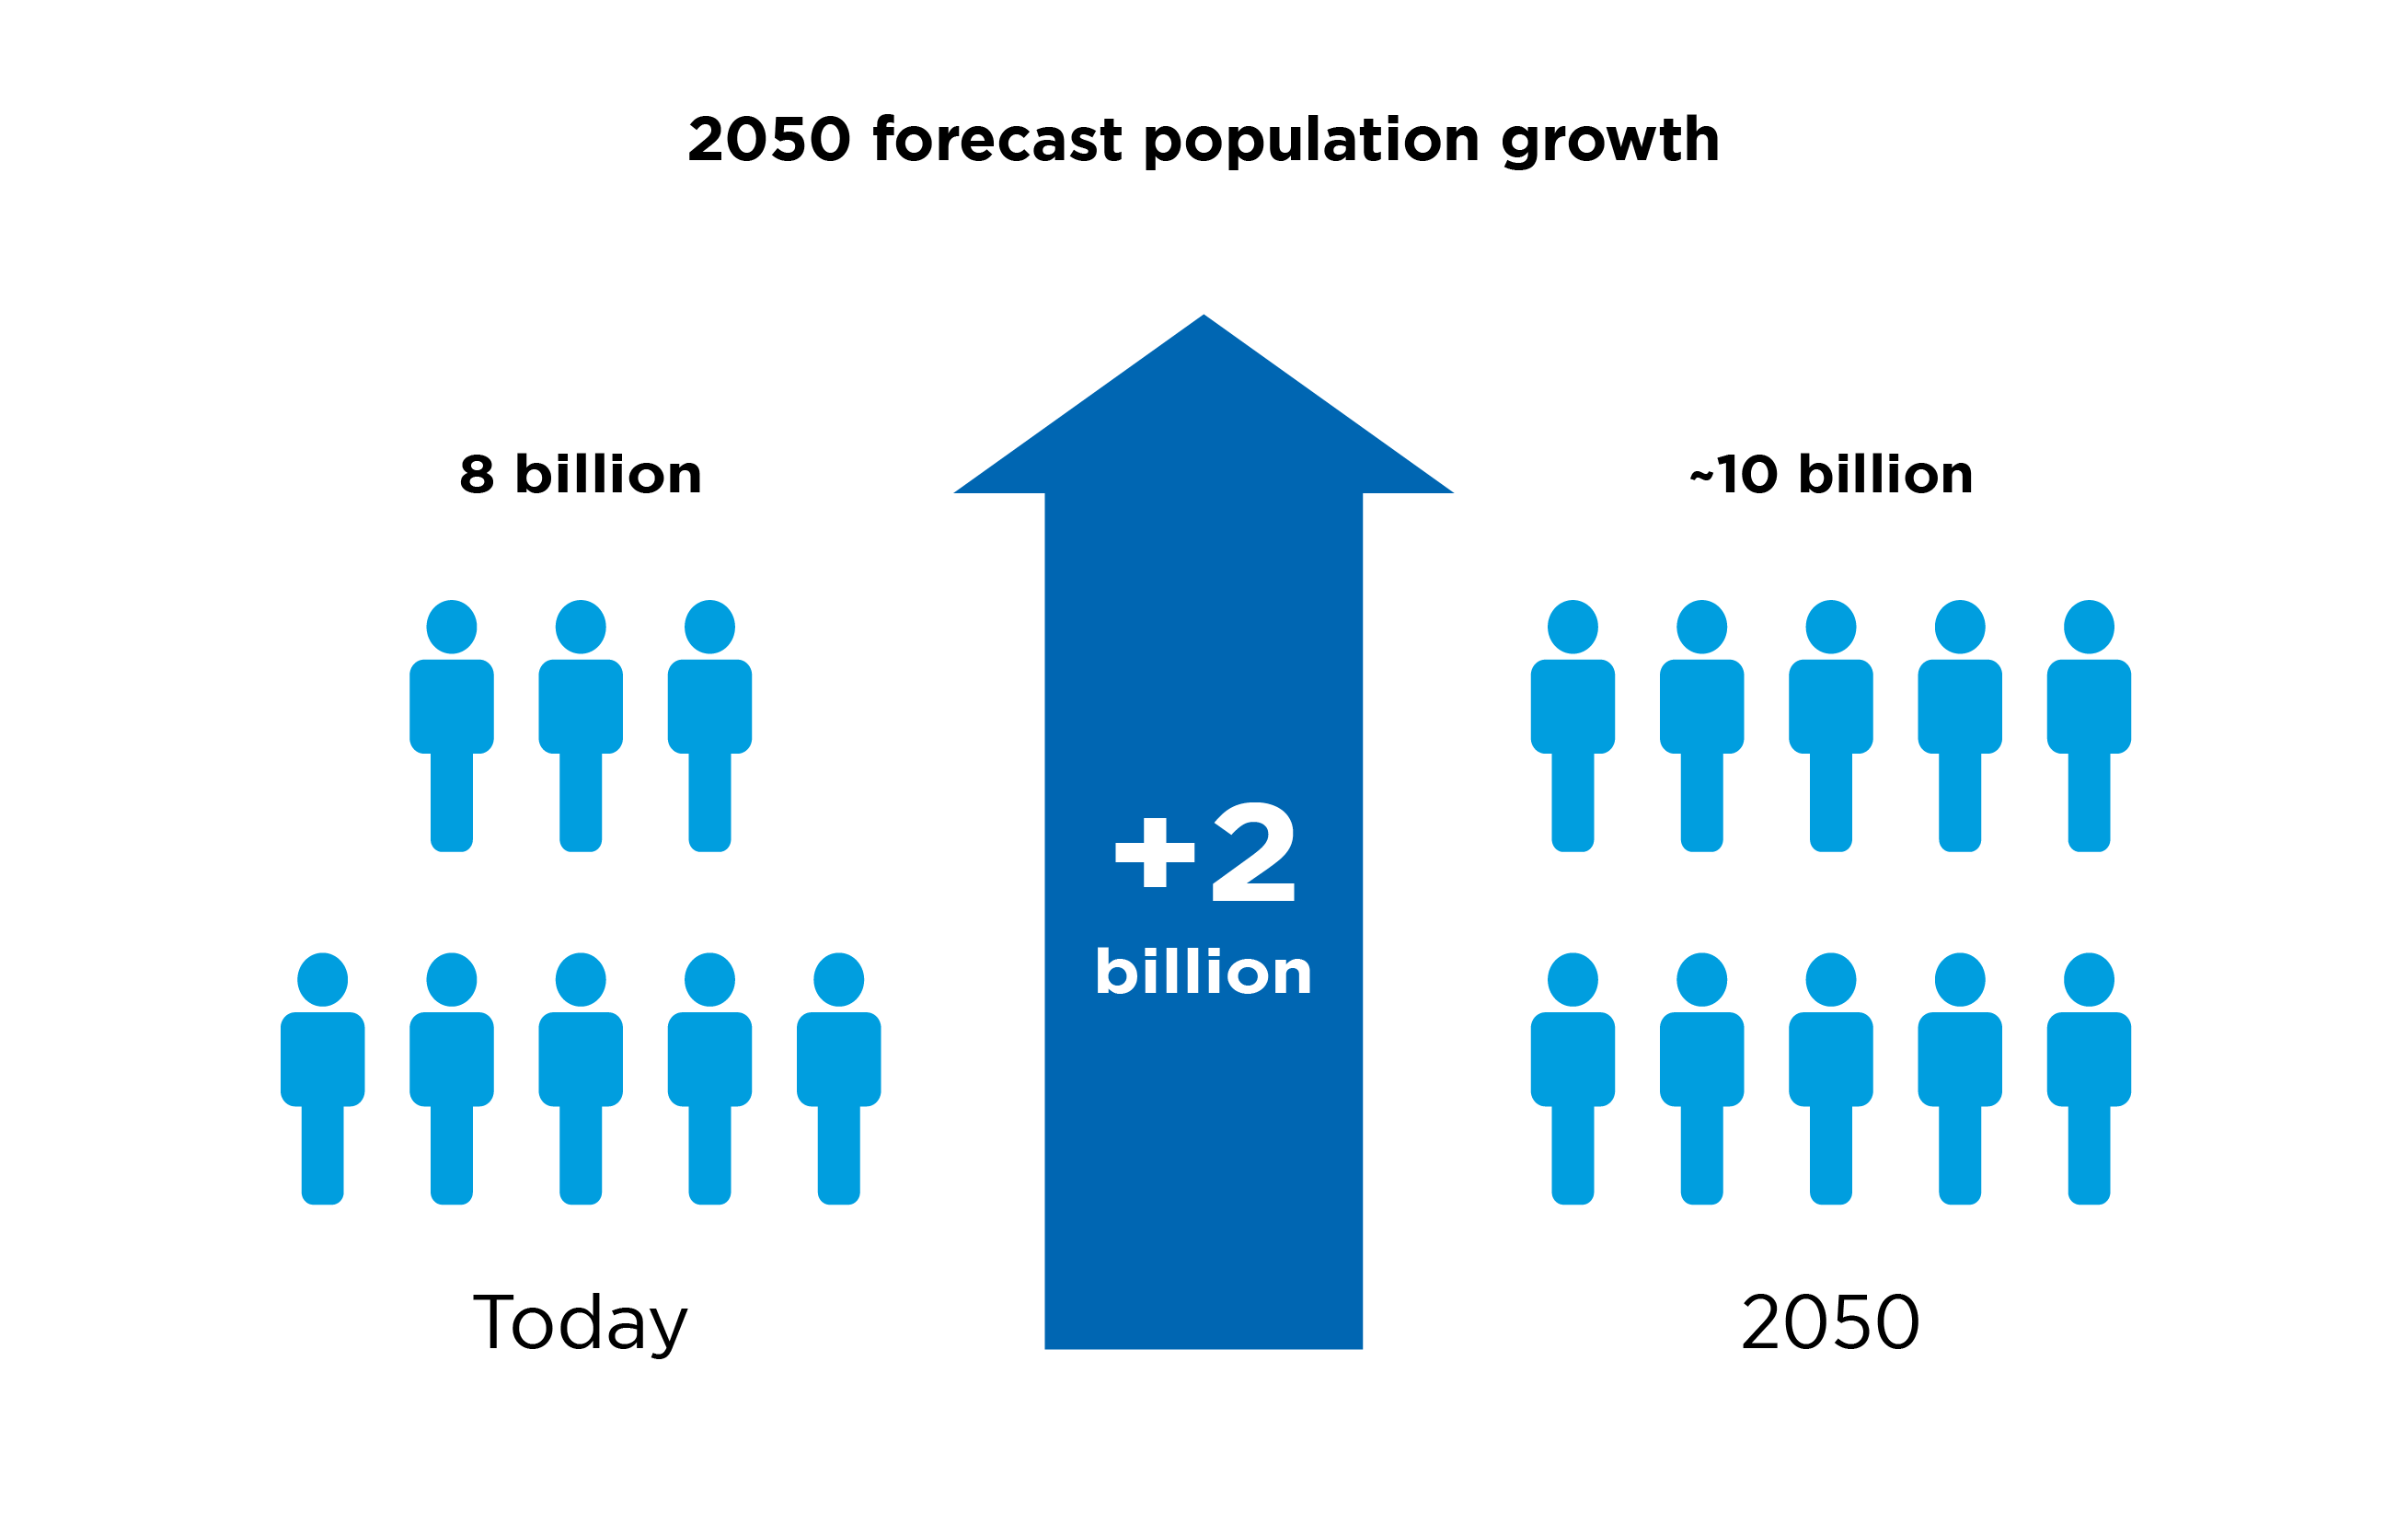 Infographic illustrating a forecast global population growth of an additional 2 billion people, from 8 billion people in 2022 to 10 billion people in 2050. 